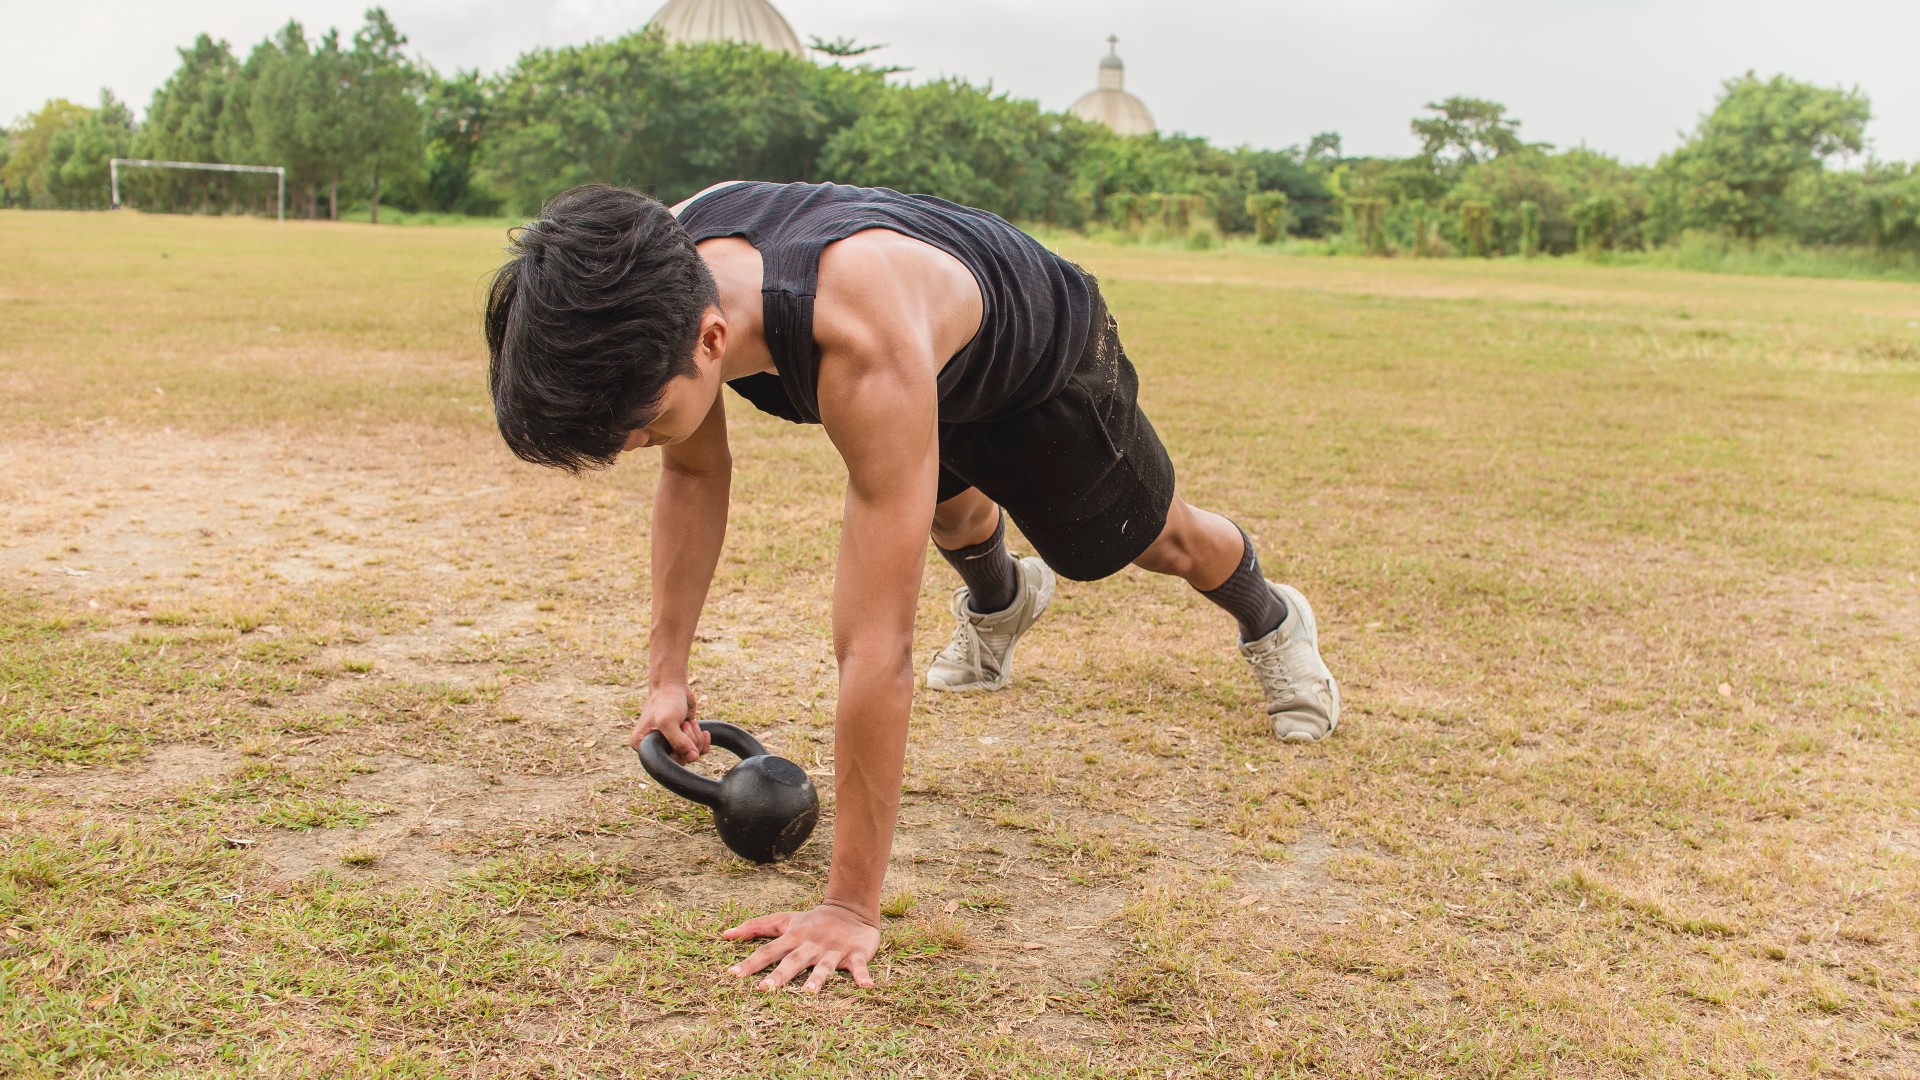 Man moving a kettlebell from one side to the other in a plank position on grass